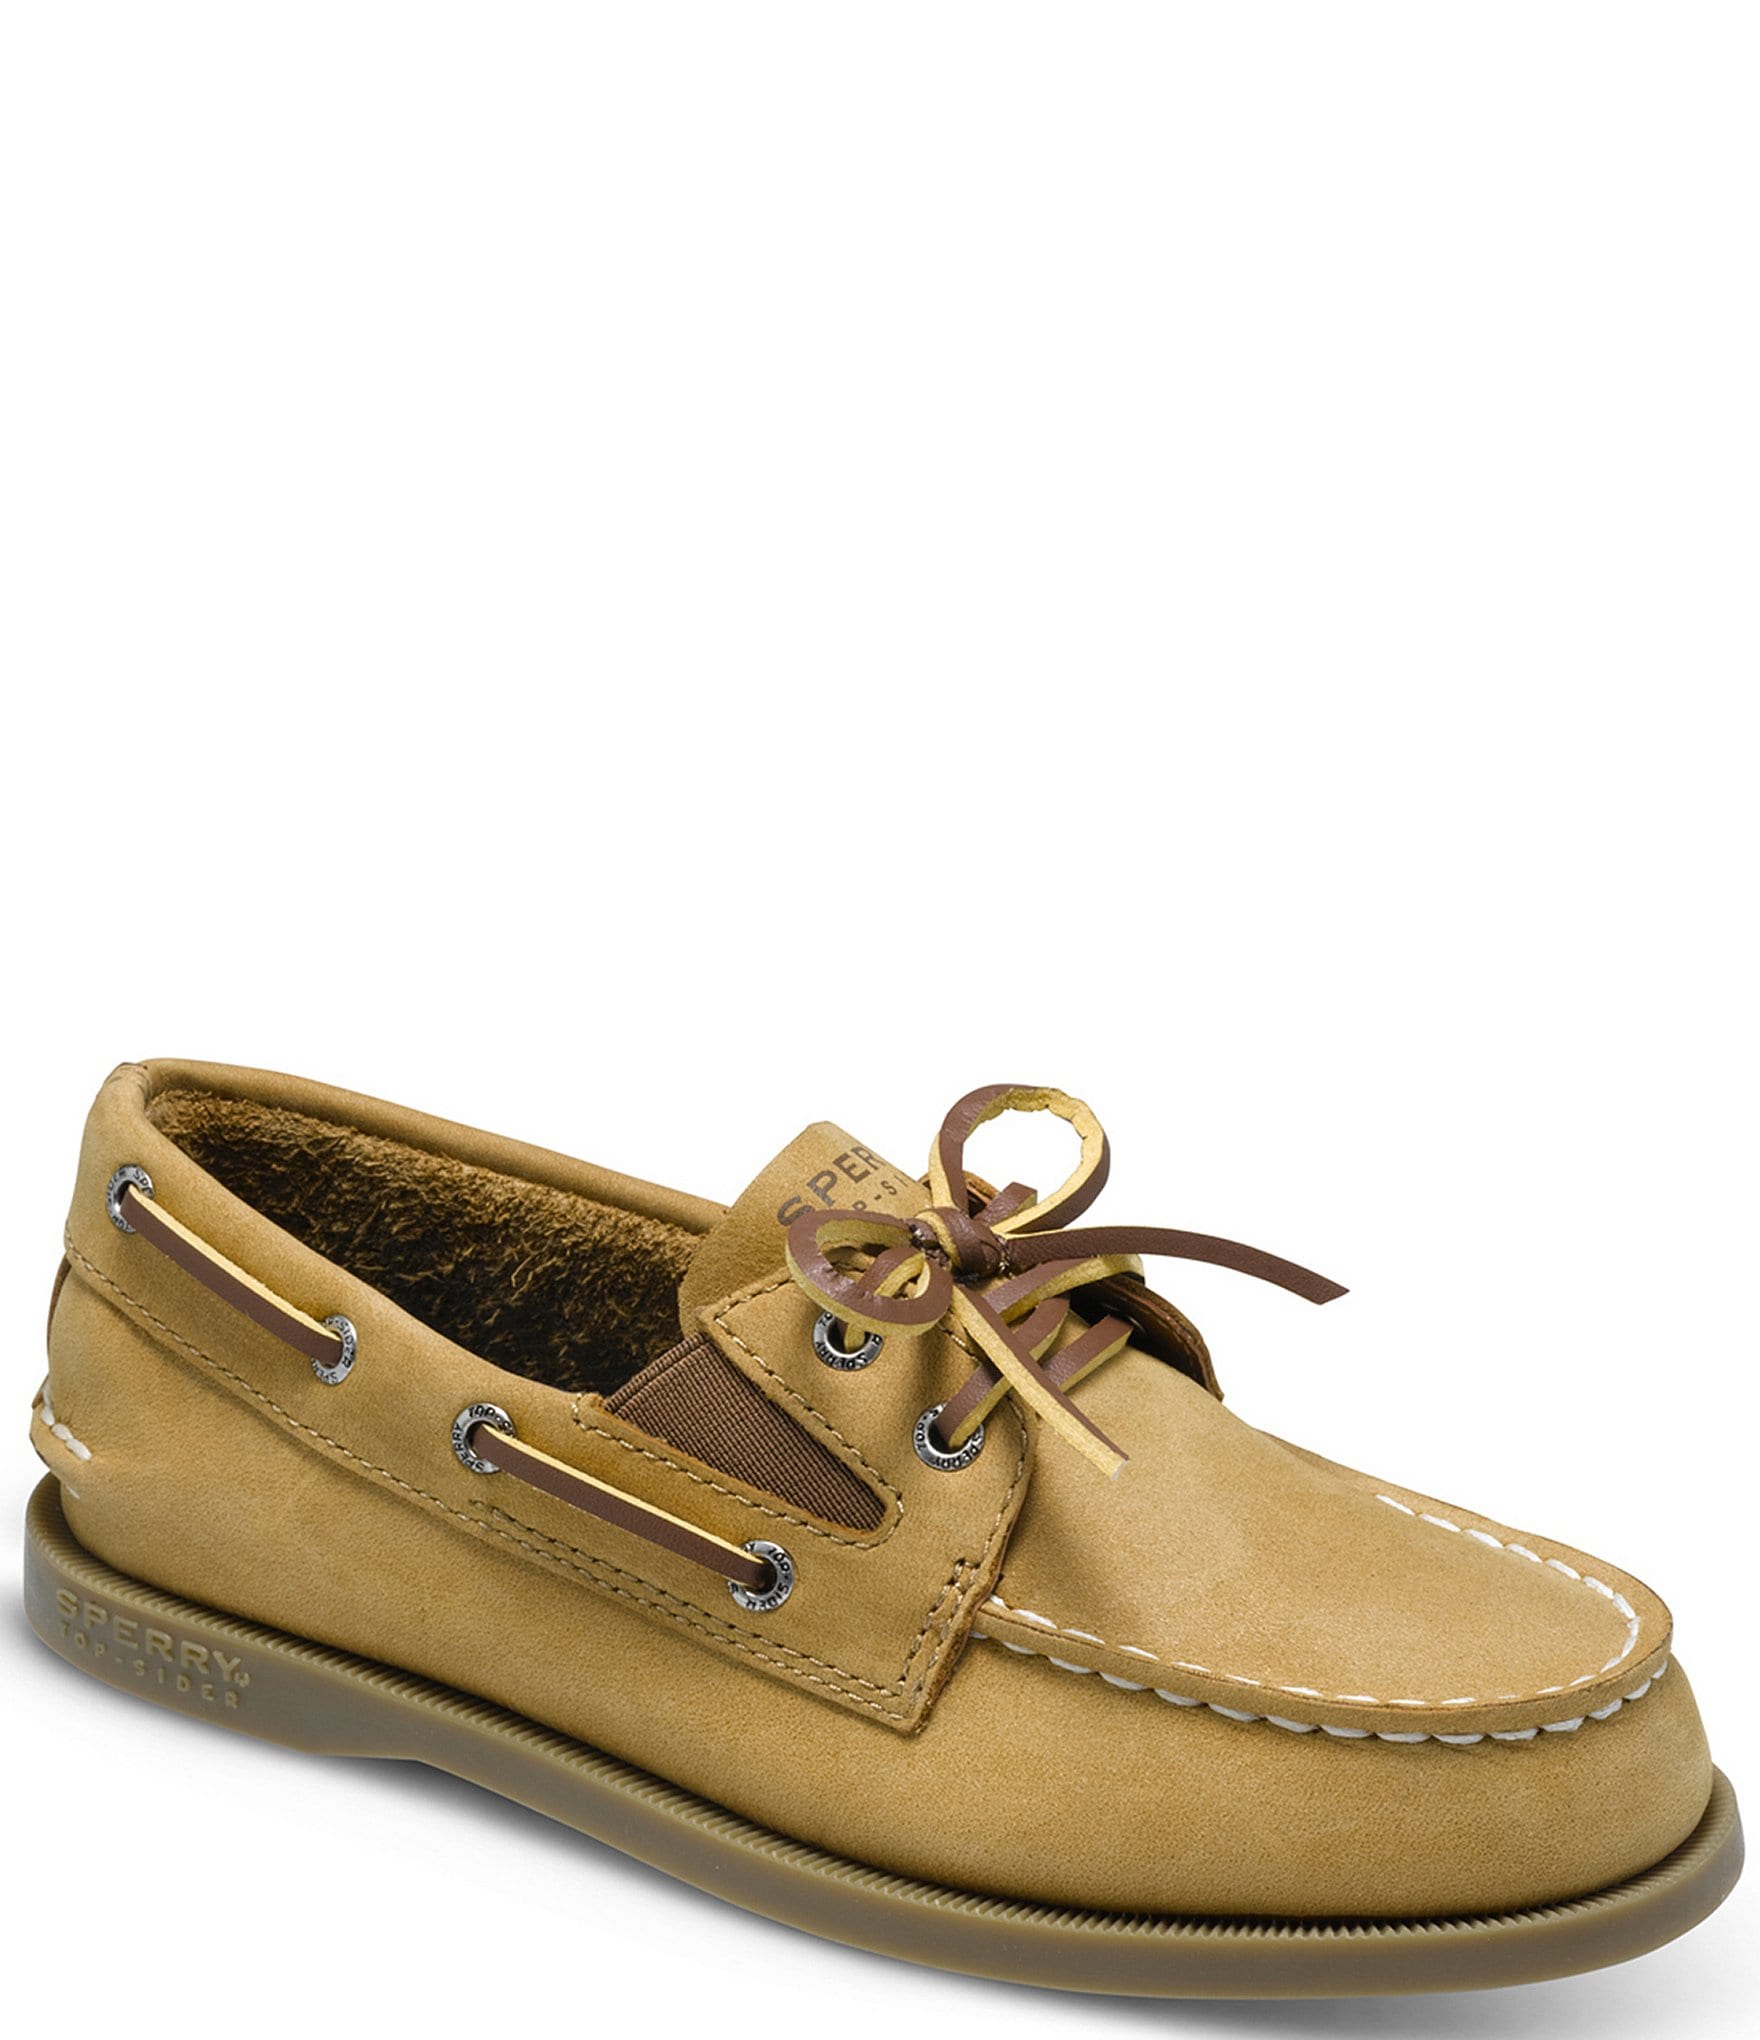 Girls' Slip-On Casual Boat Shoes (Youth 